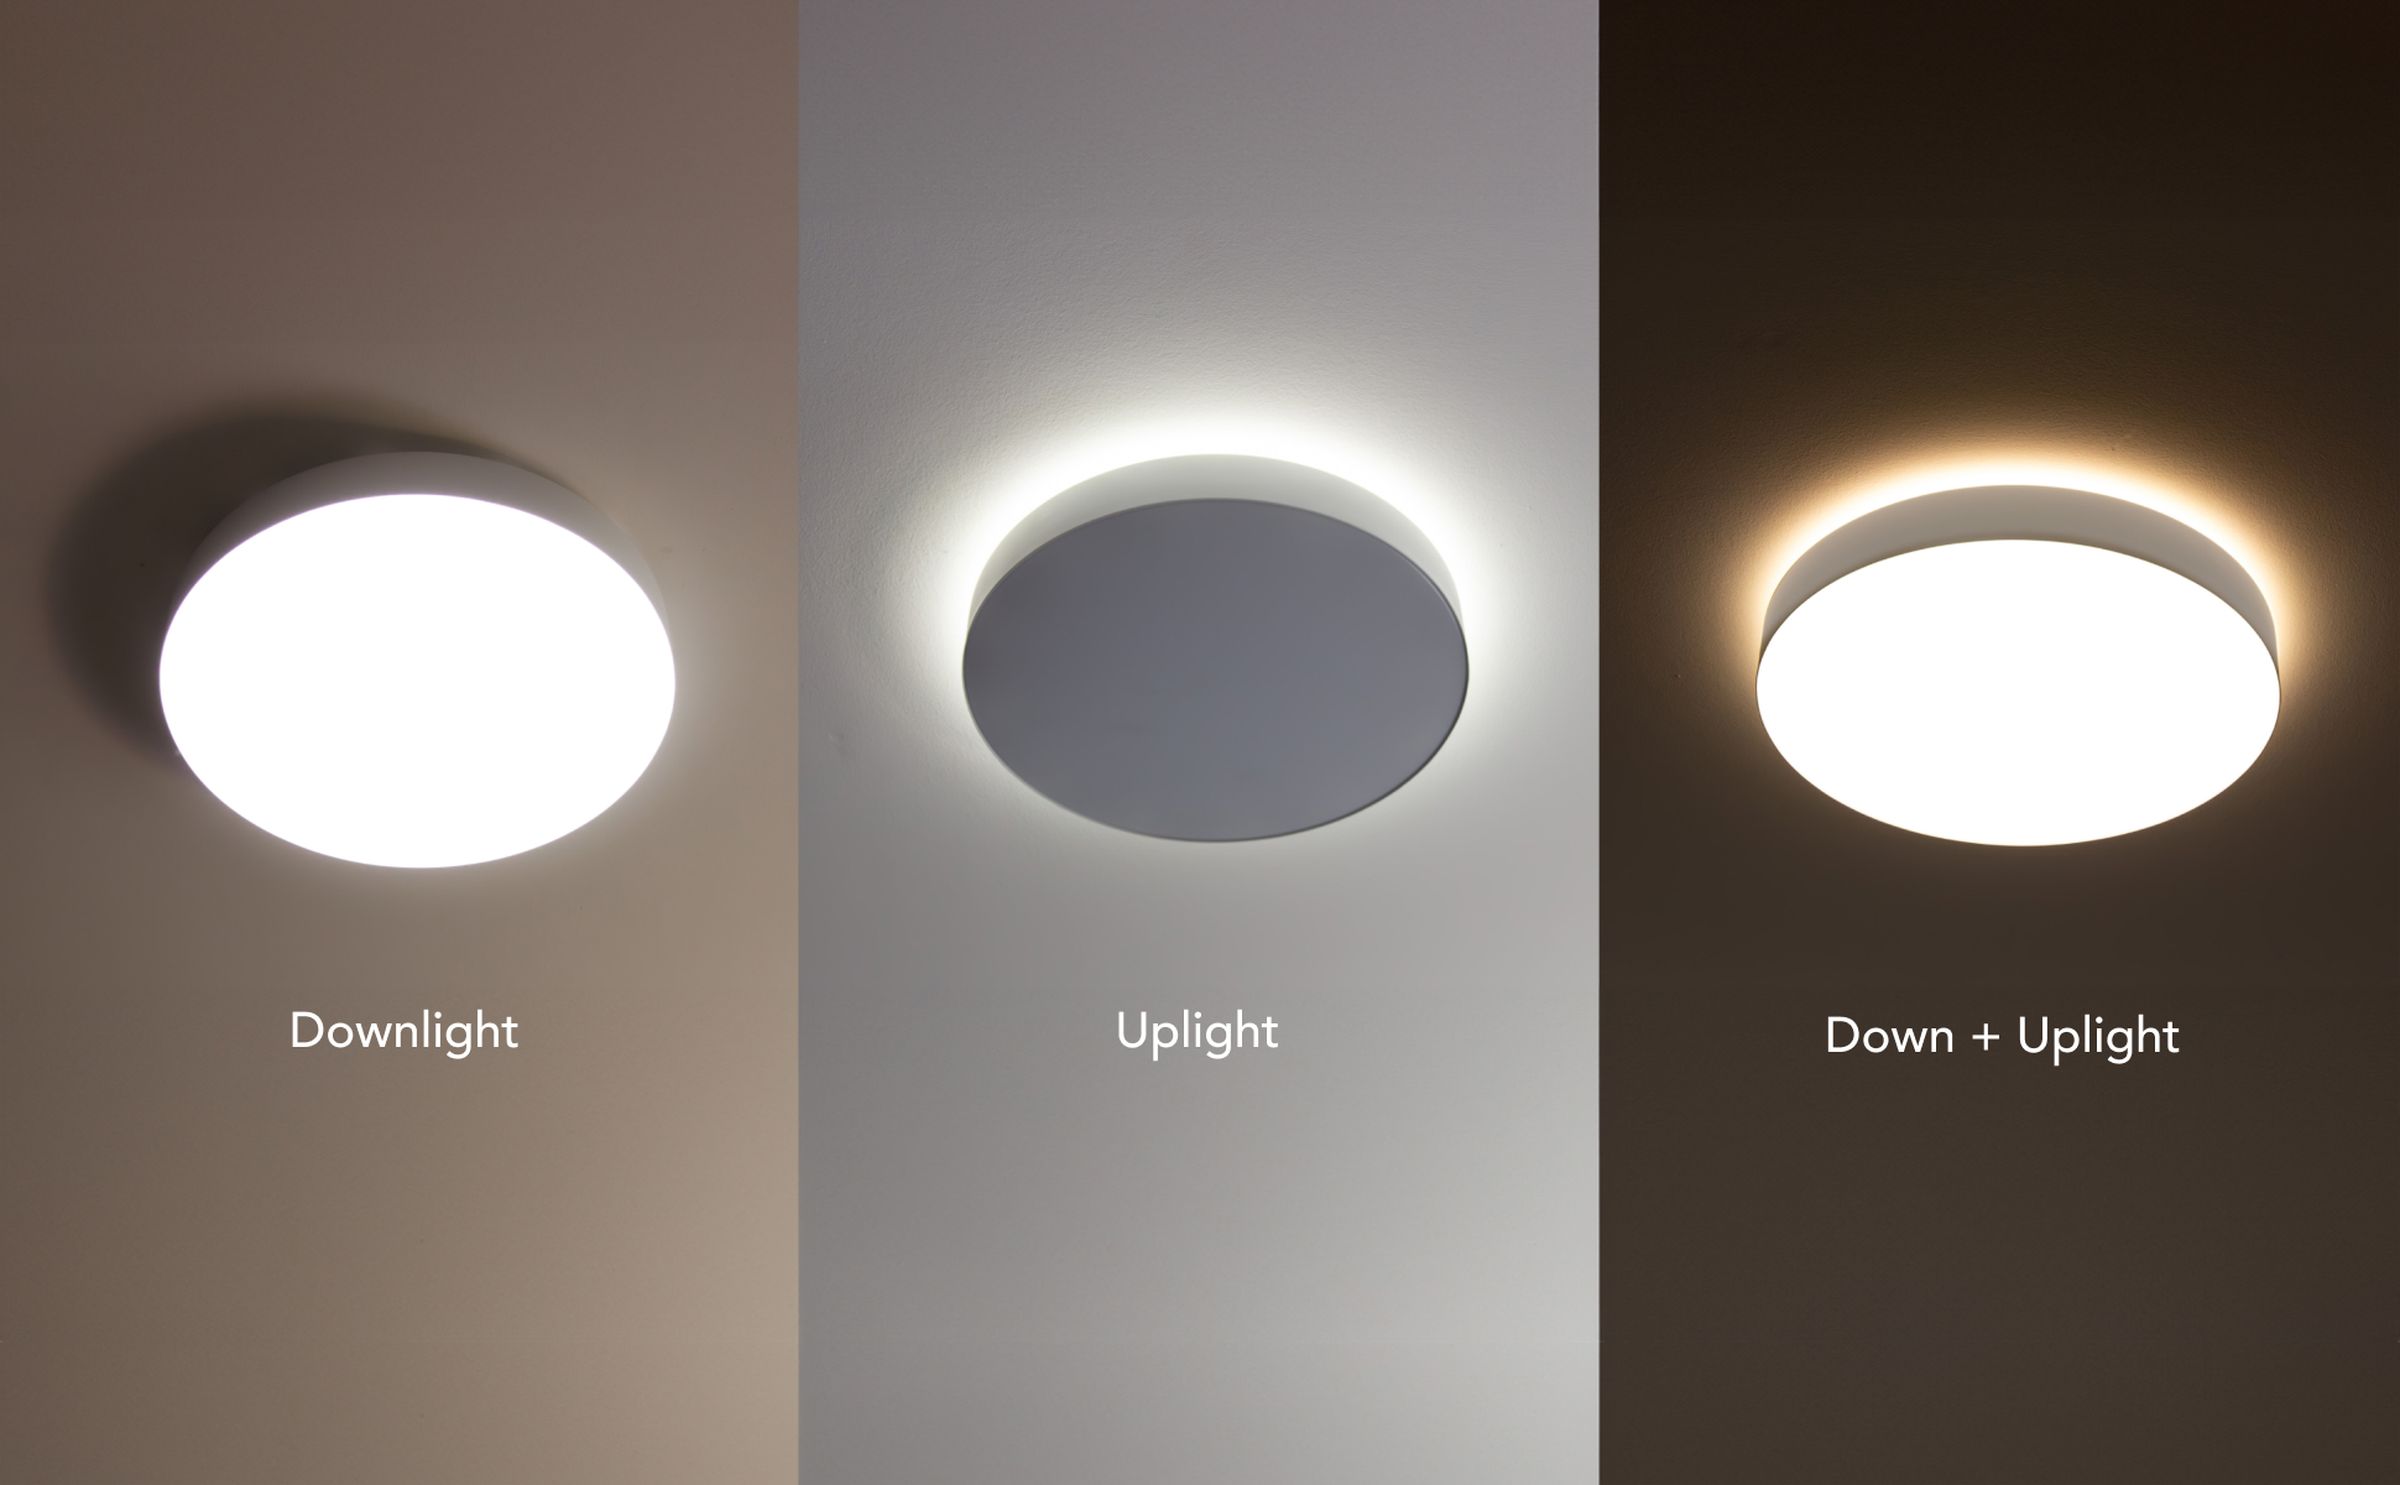 The new ceiling light features an uplight and downlight for different effects.